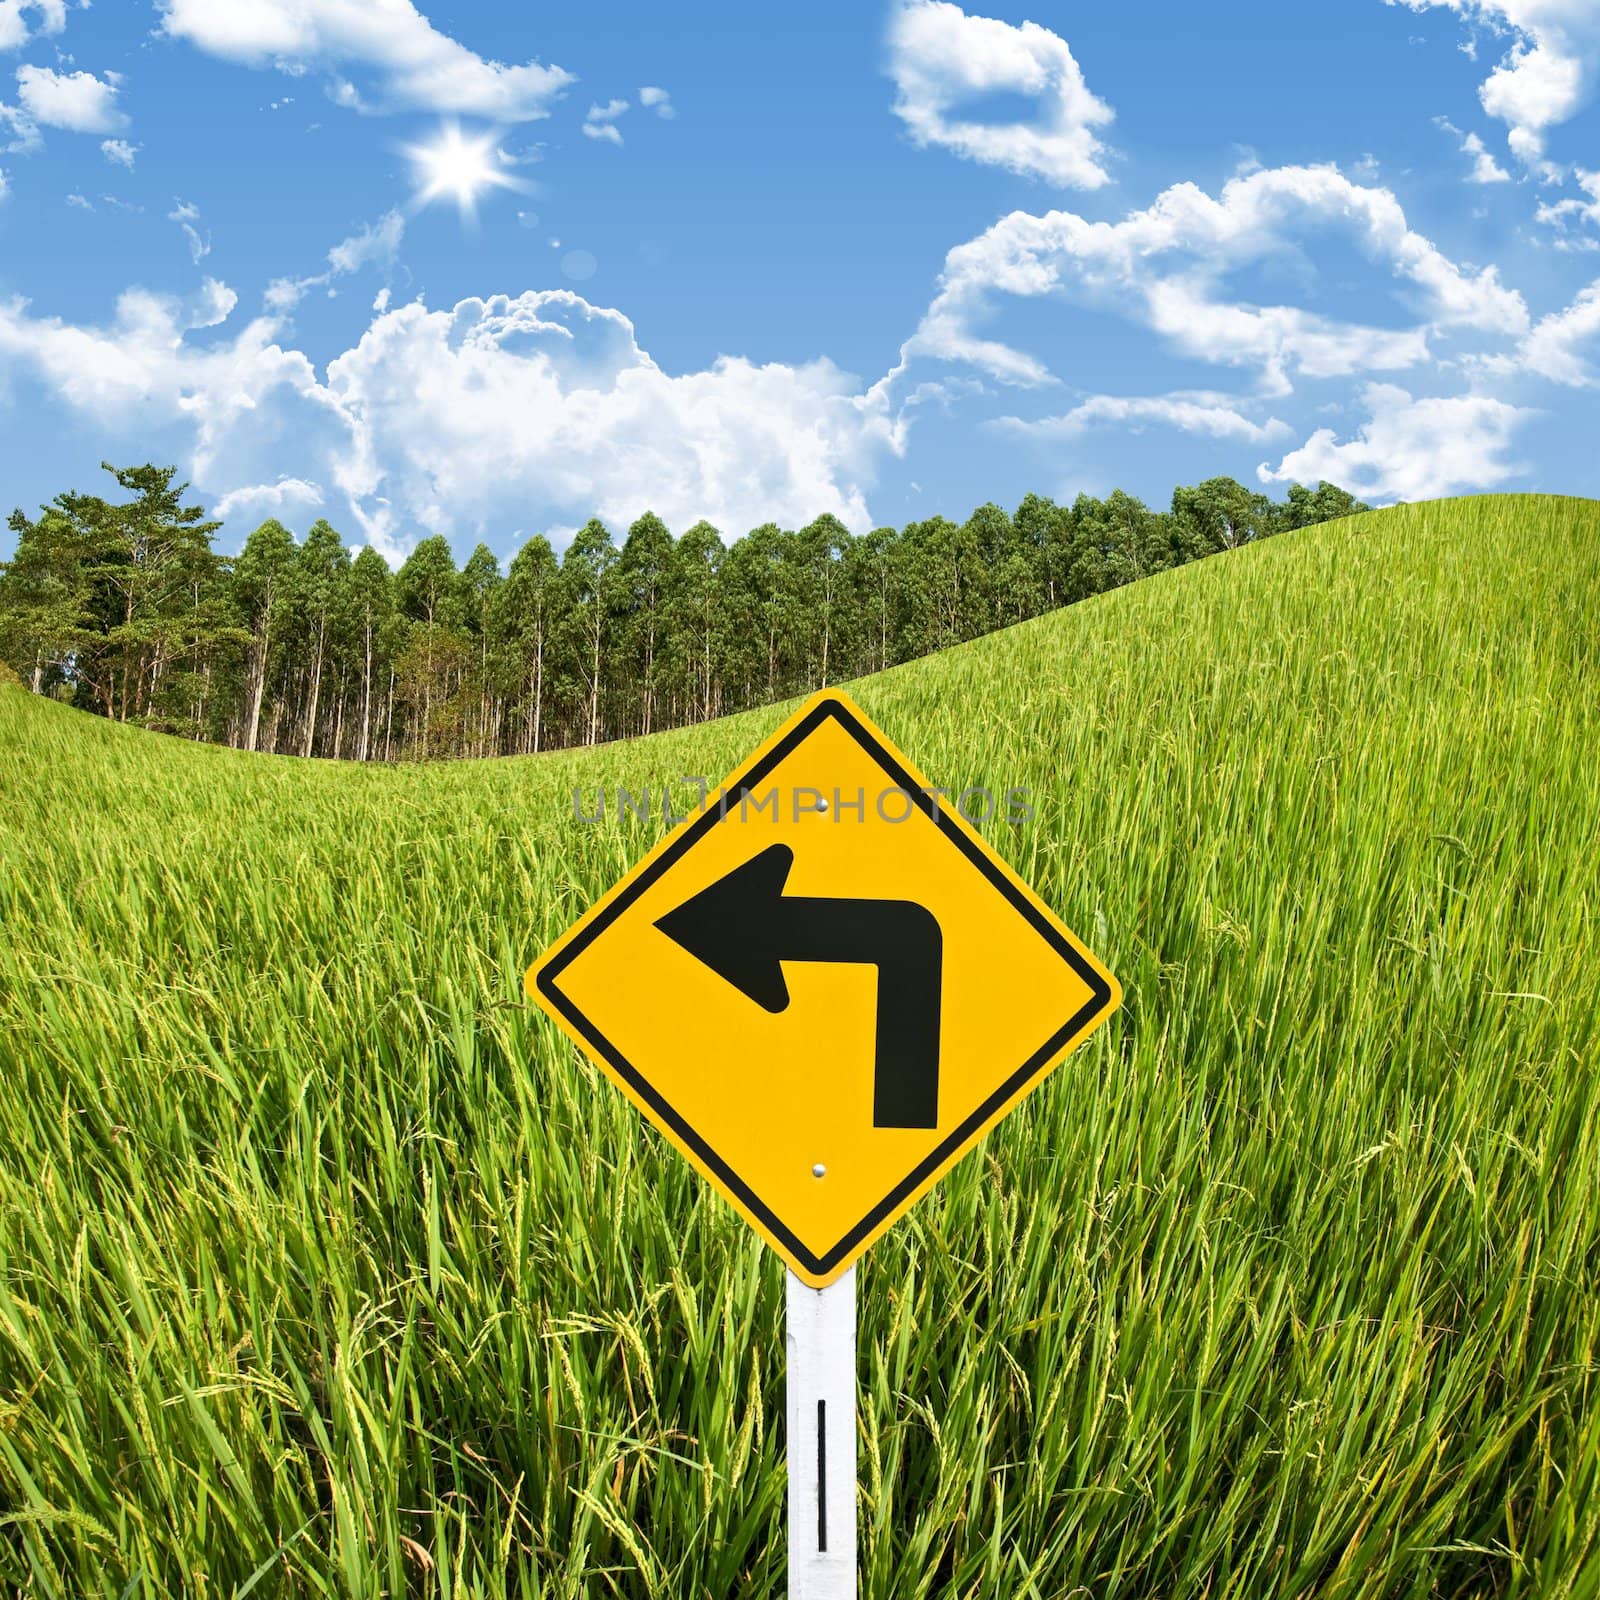 Turn left sign with rice field, Travel in countryside concept